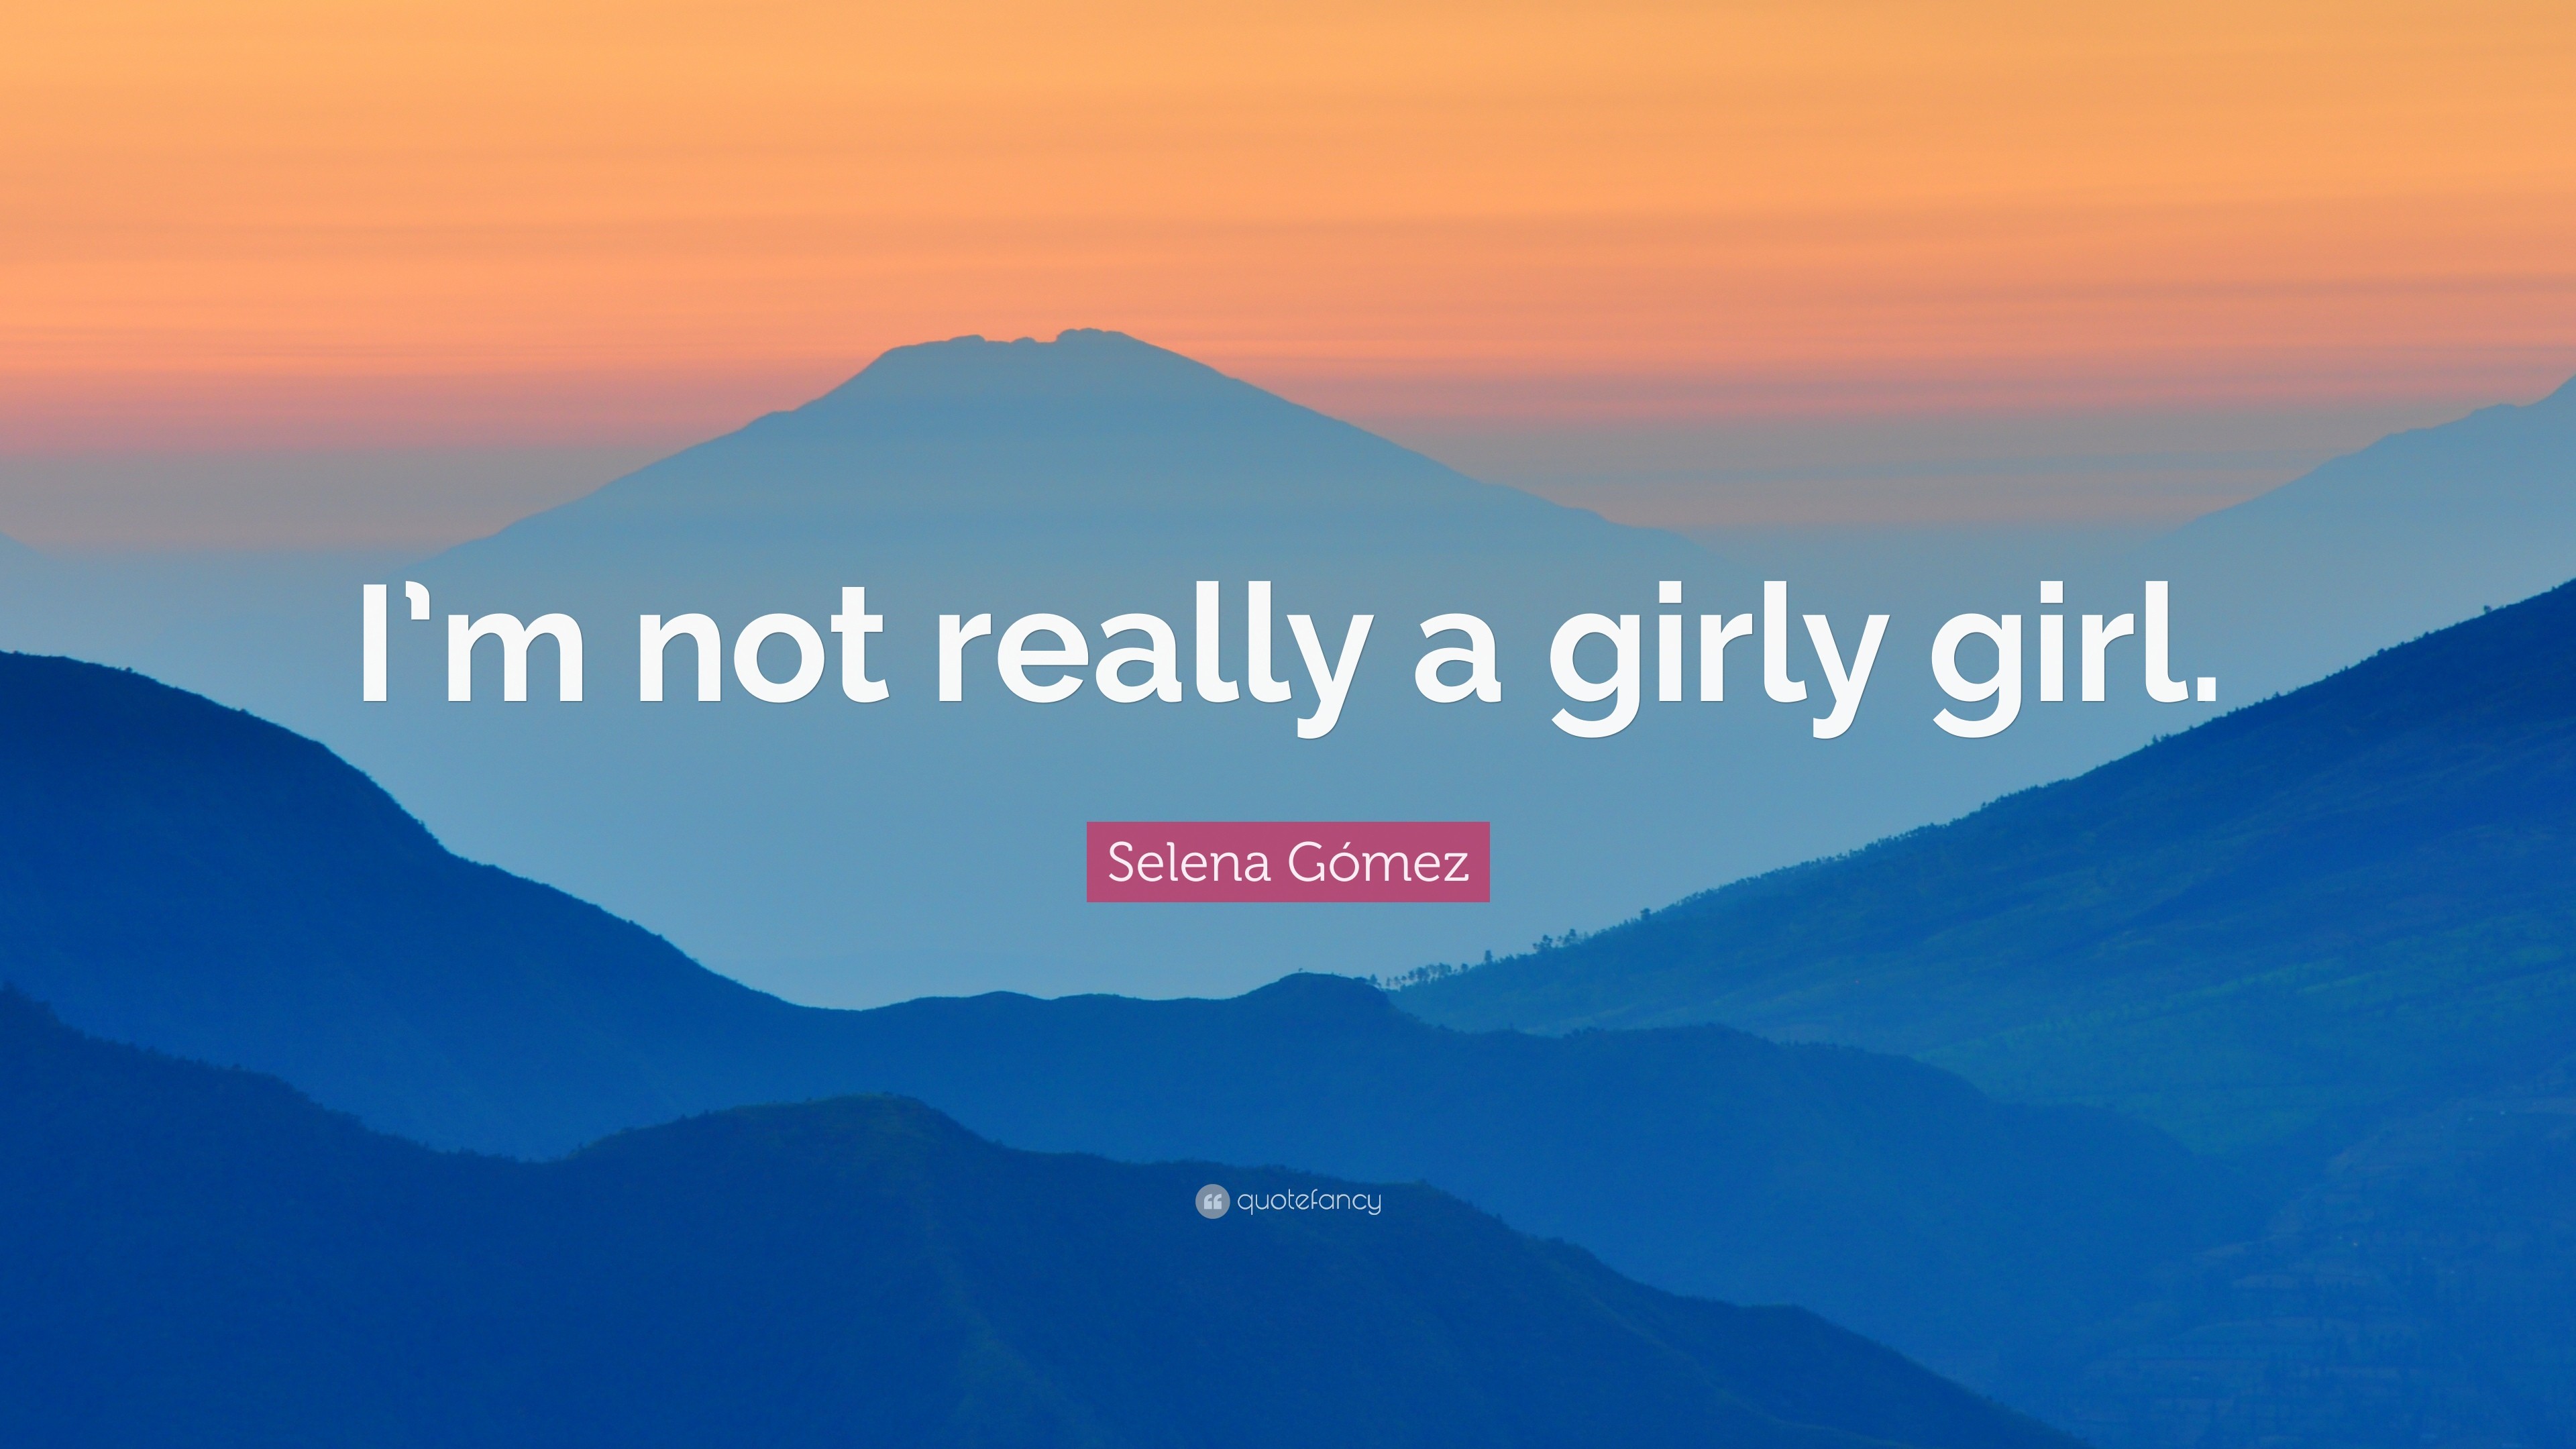 3840x2160 Selena GÃ³mez Quote: “I'm not really a girly girl.”